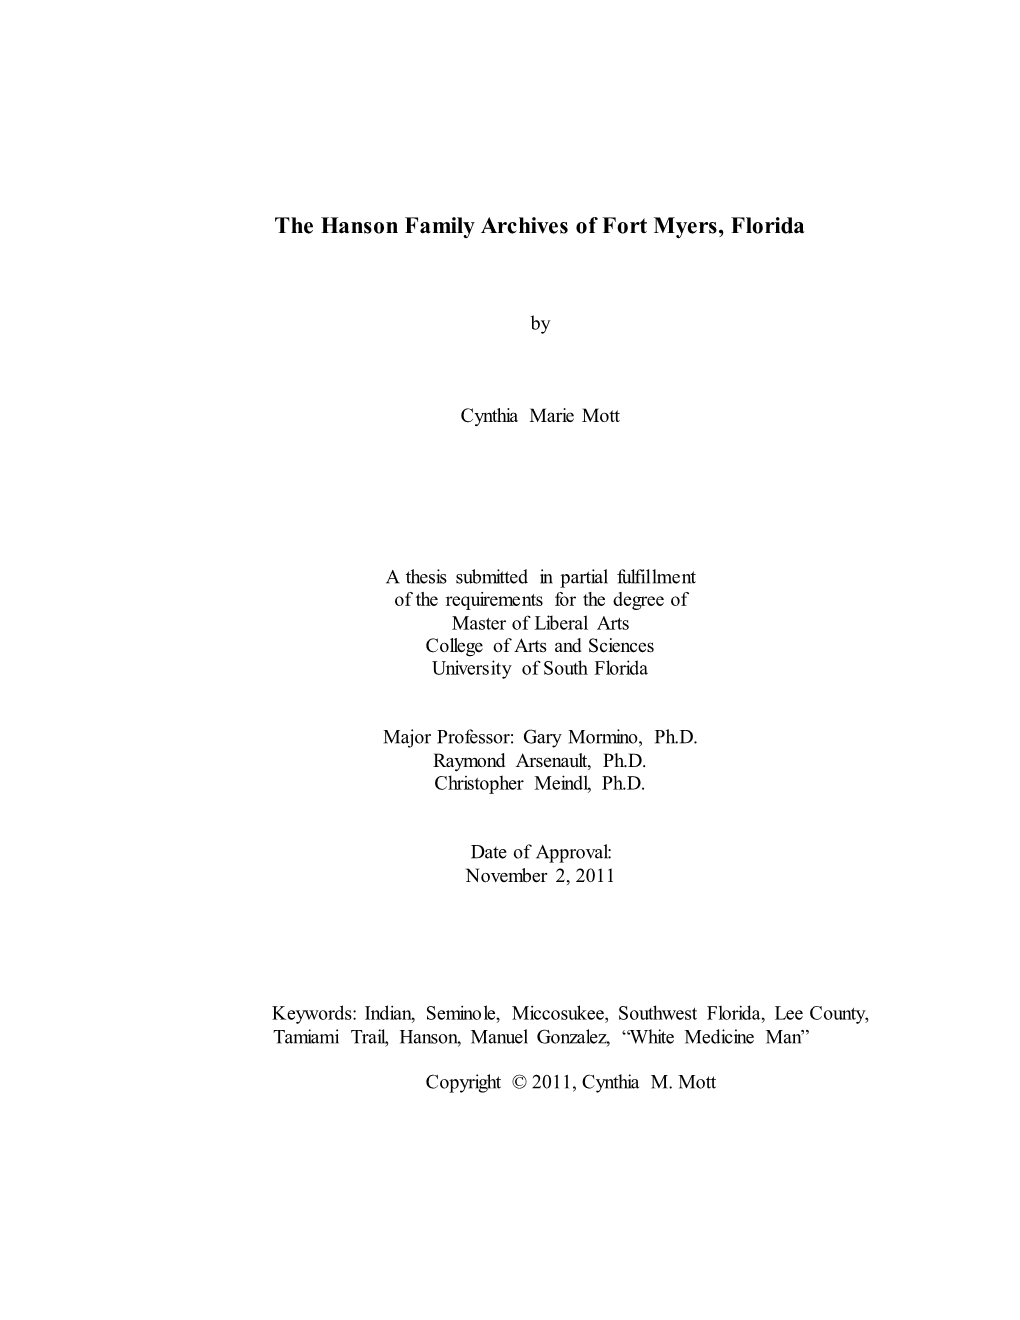 The Hanson Family Archives of Fort Myers, Florida